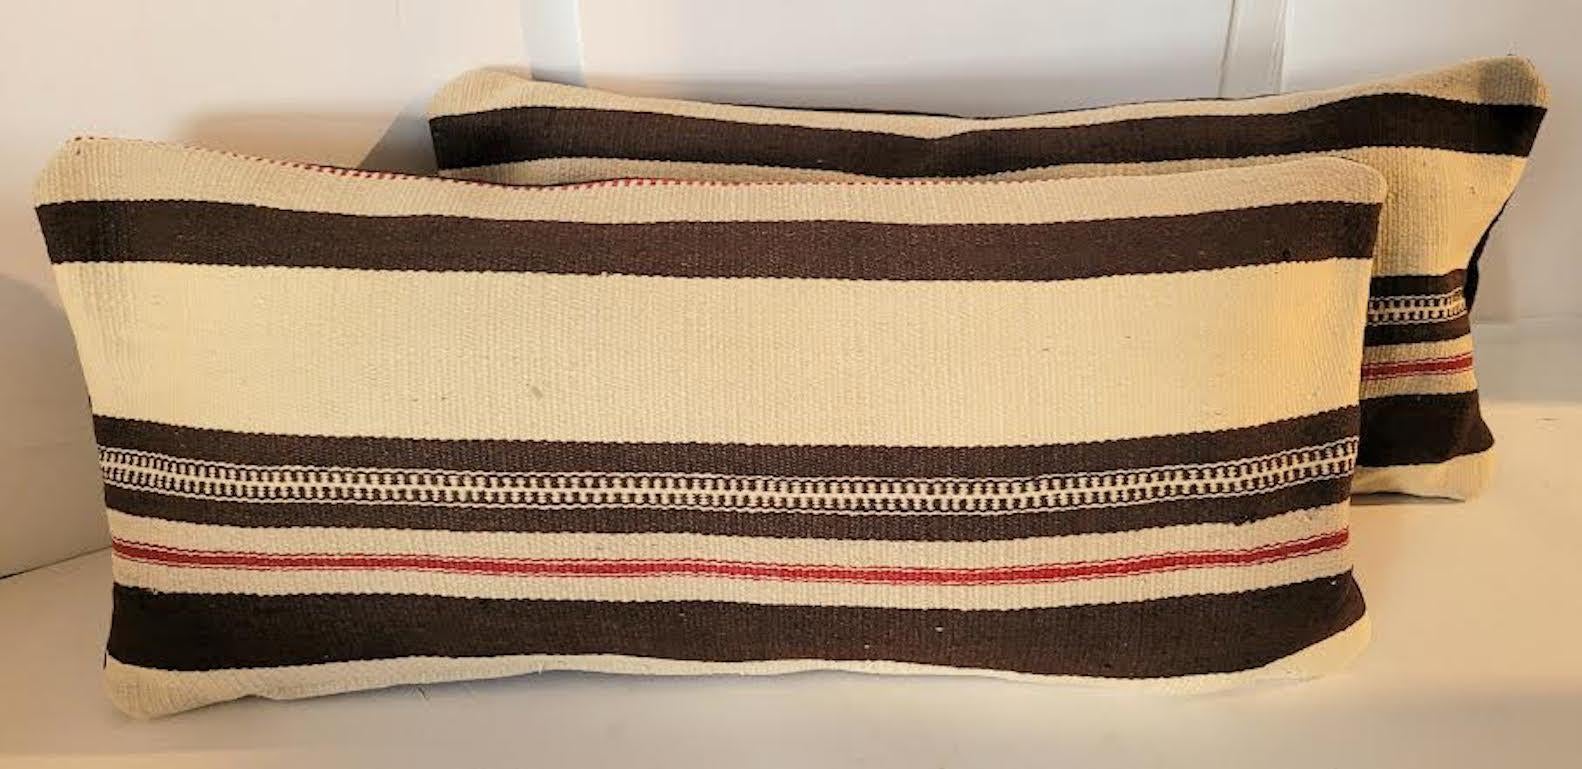 Pair of 20th C Mexican / American Texcoco Indian weaving bolster pillows.
Beautiful textured velvet backing and zippered casing. Feather and down insert.